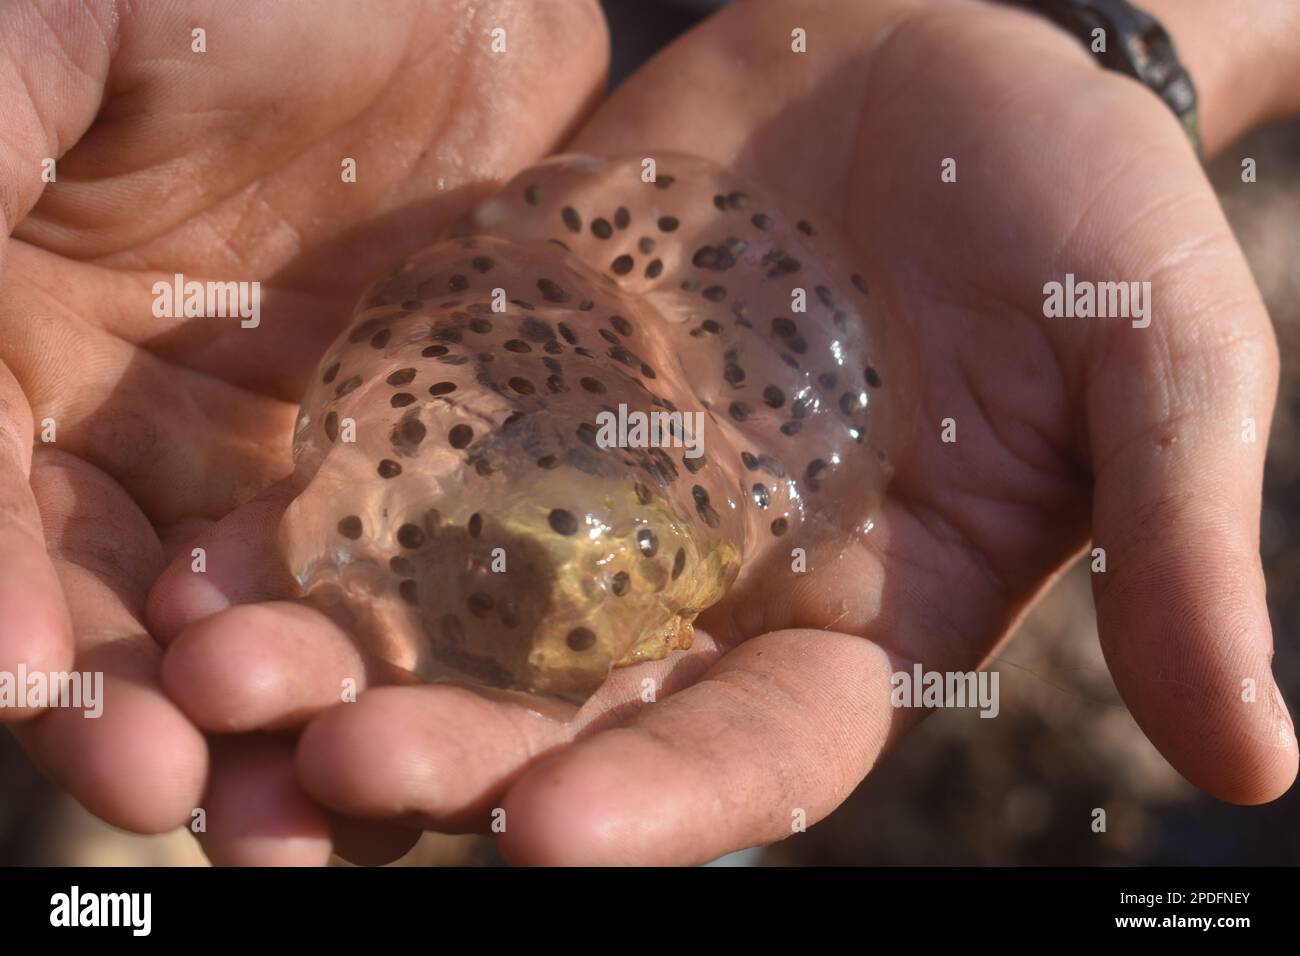 A clutch of frog eggs that were found in a creek in rural Missouri, MO, United States, US, USA, are being held up in a pair of hands. Stock Photo